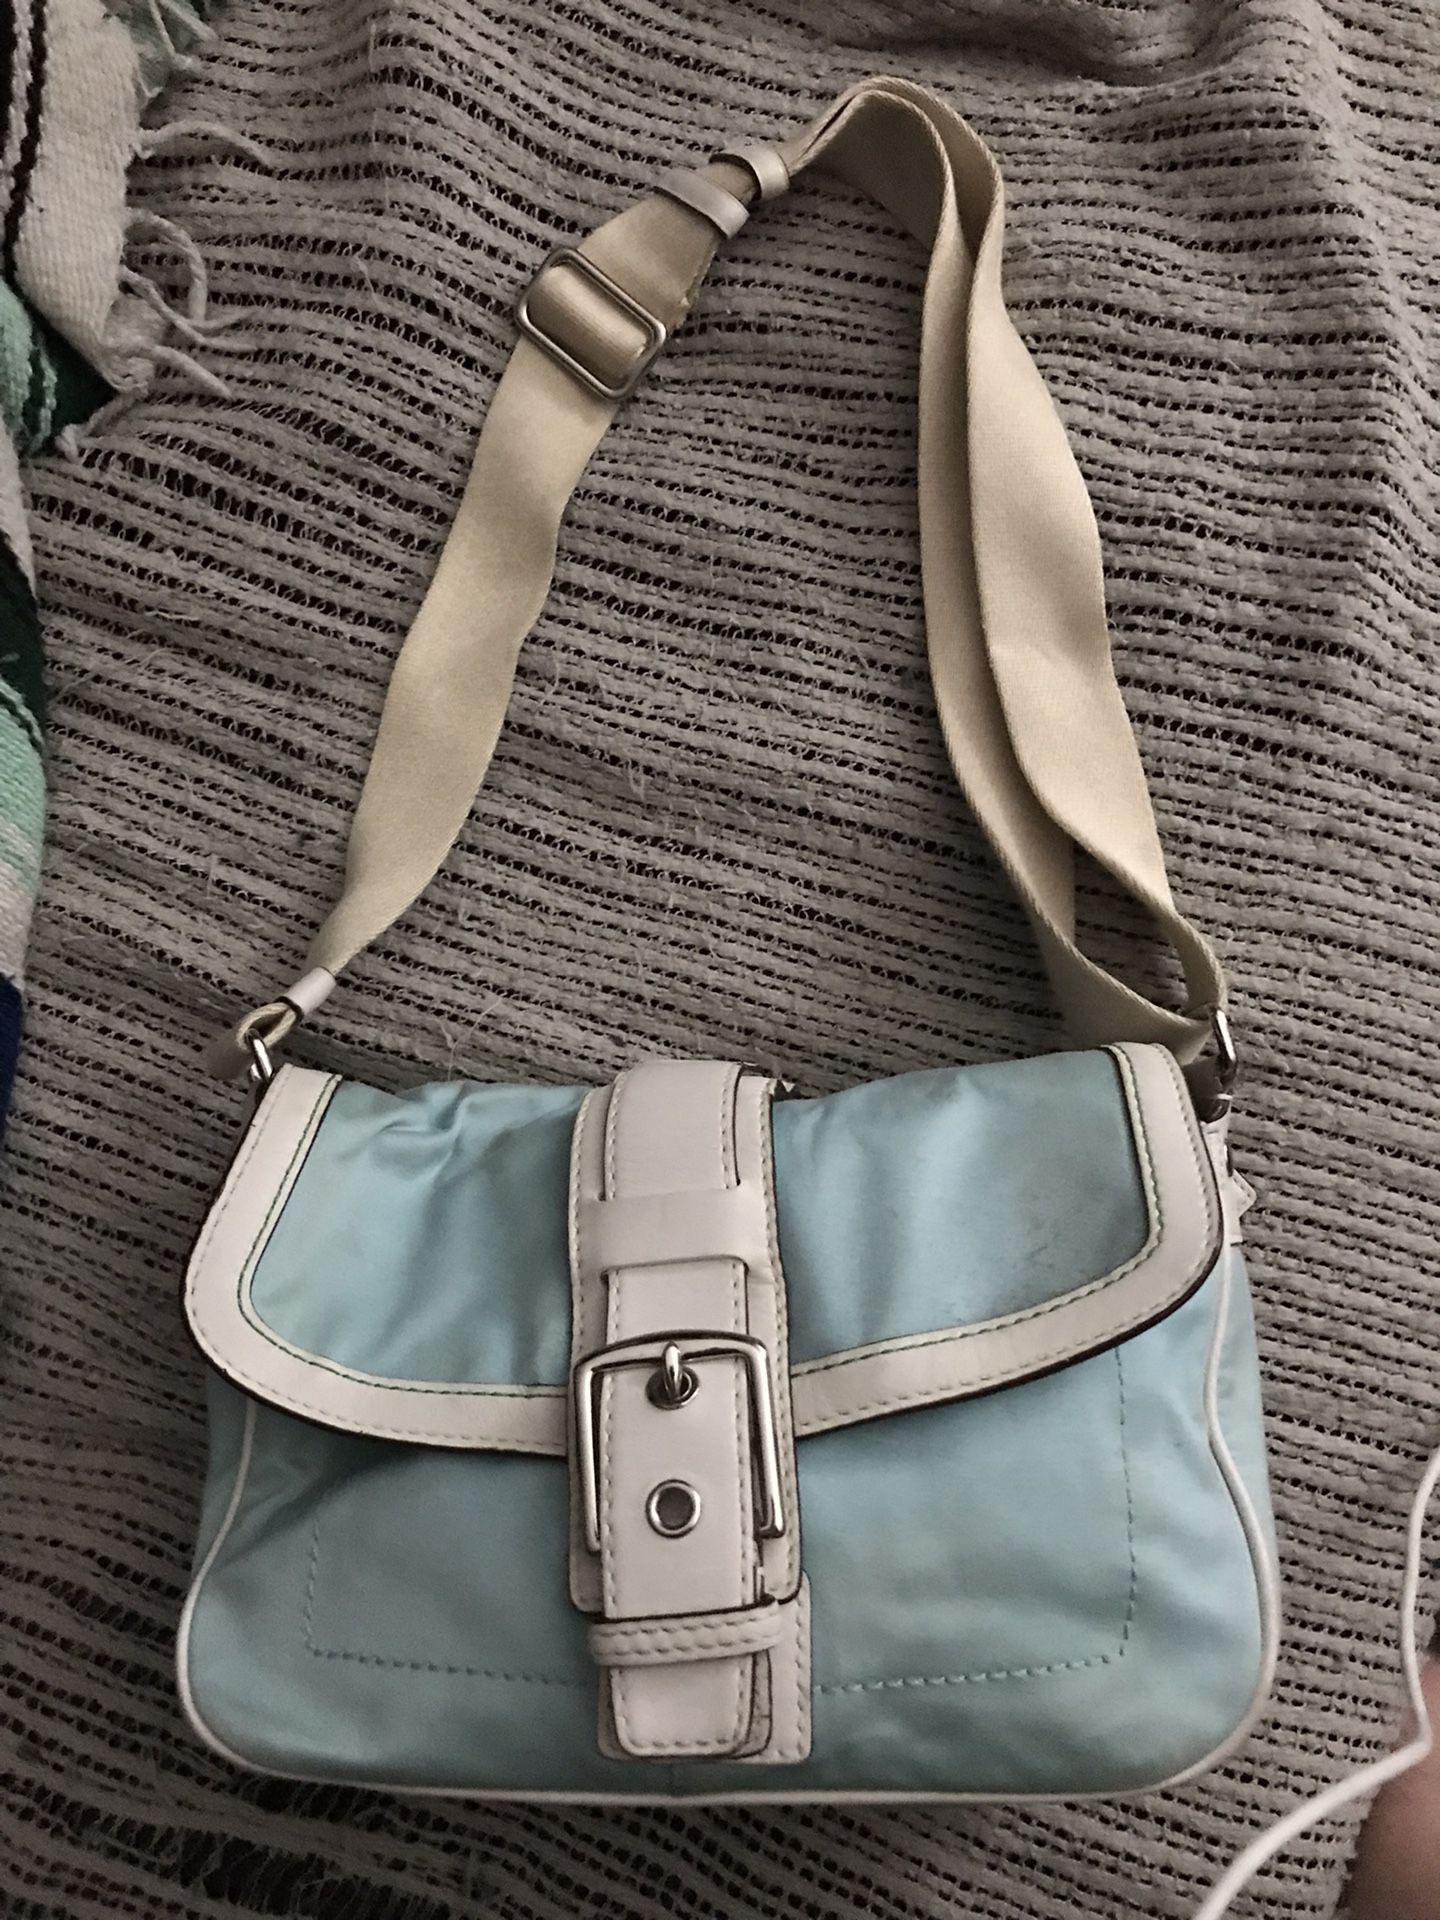 Nice Heavy Duty Coach Bag Crossbody Only $25 Takes It Now